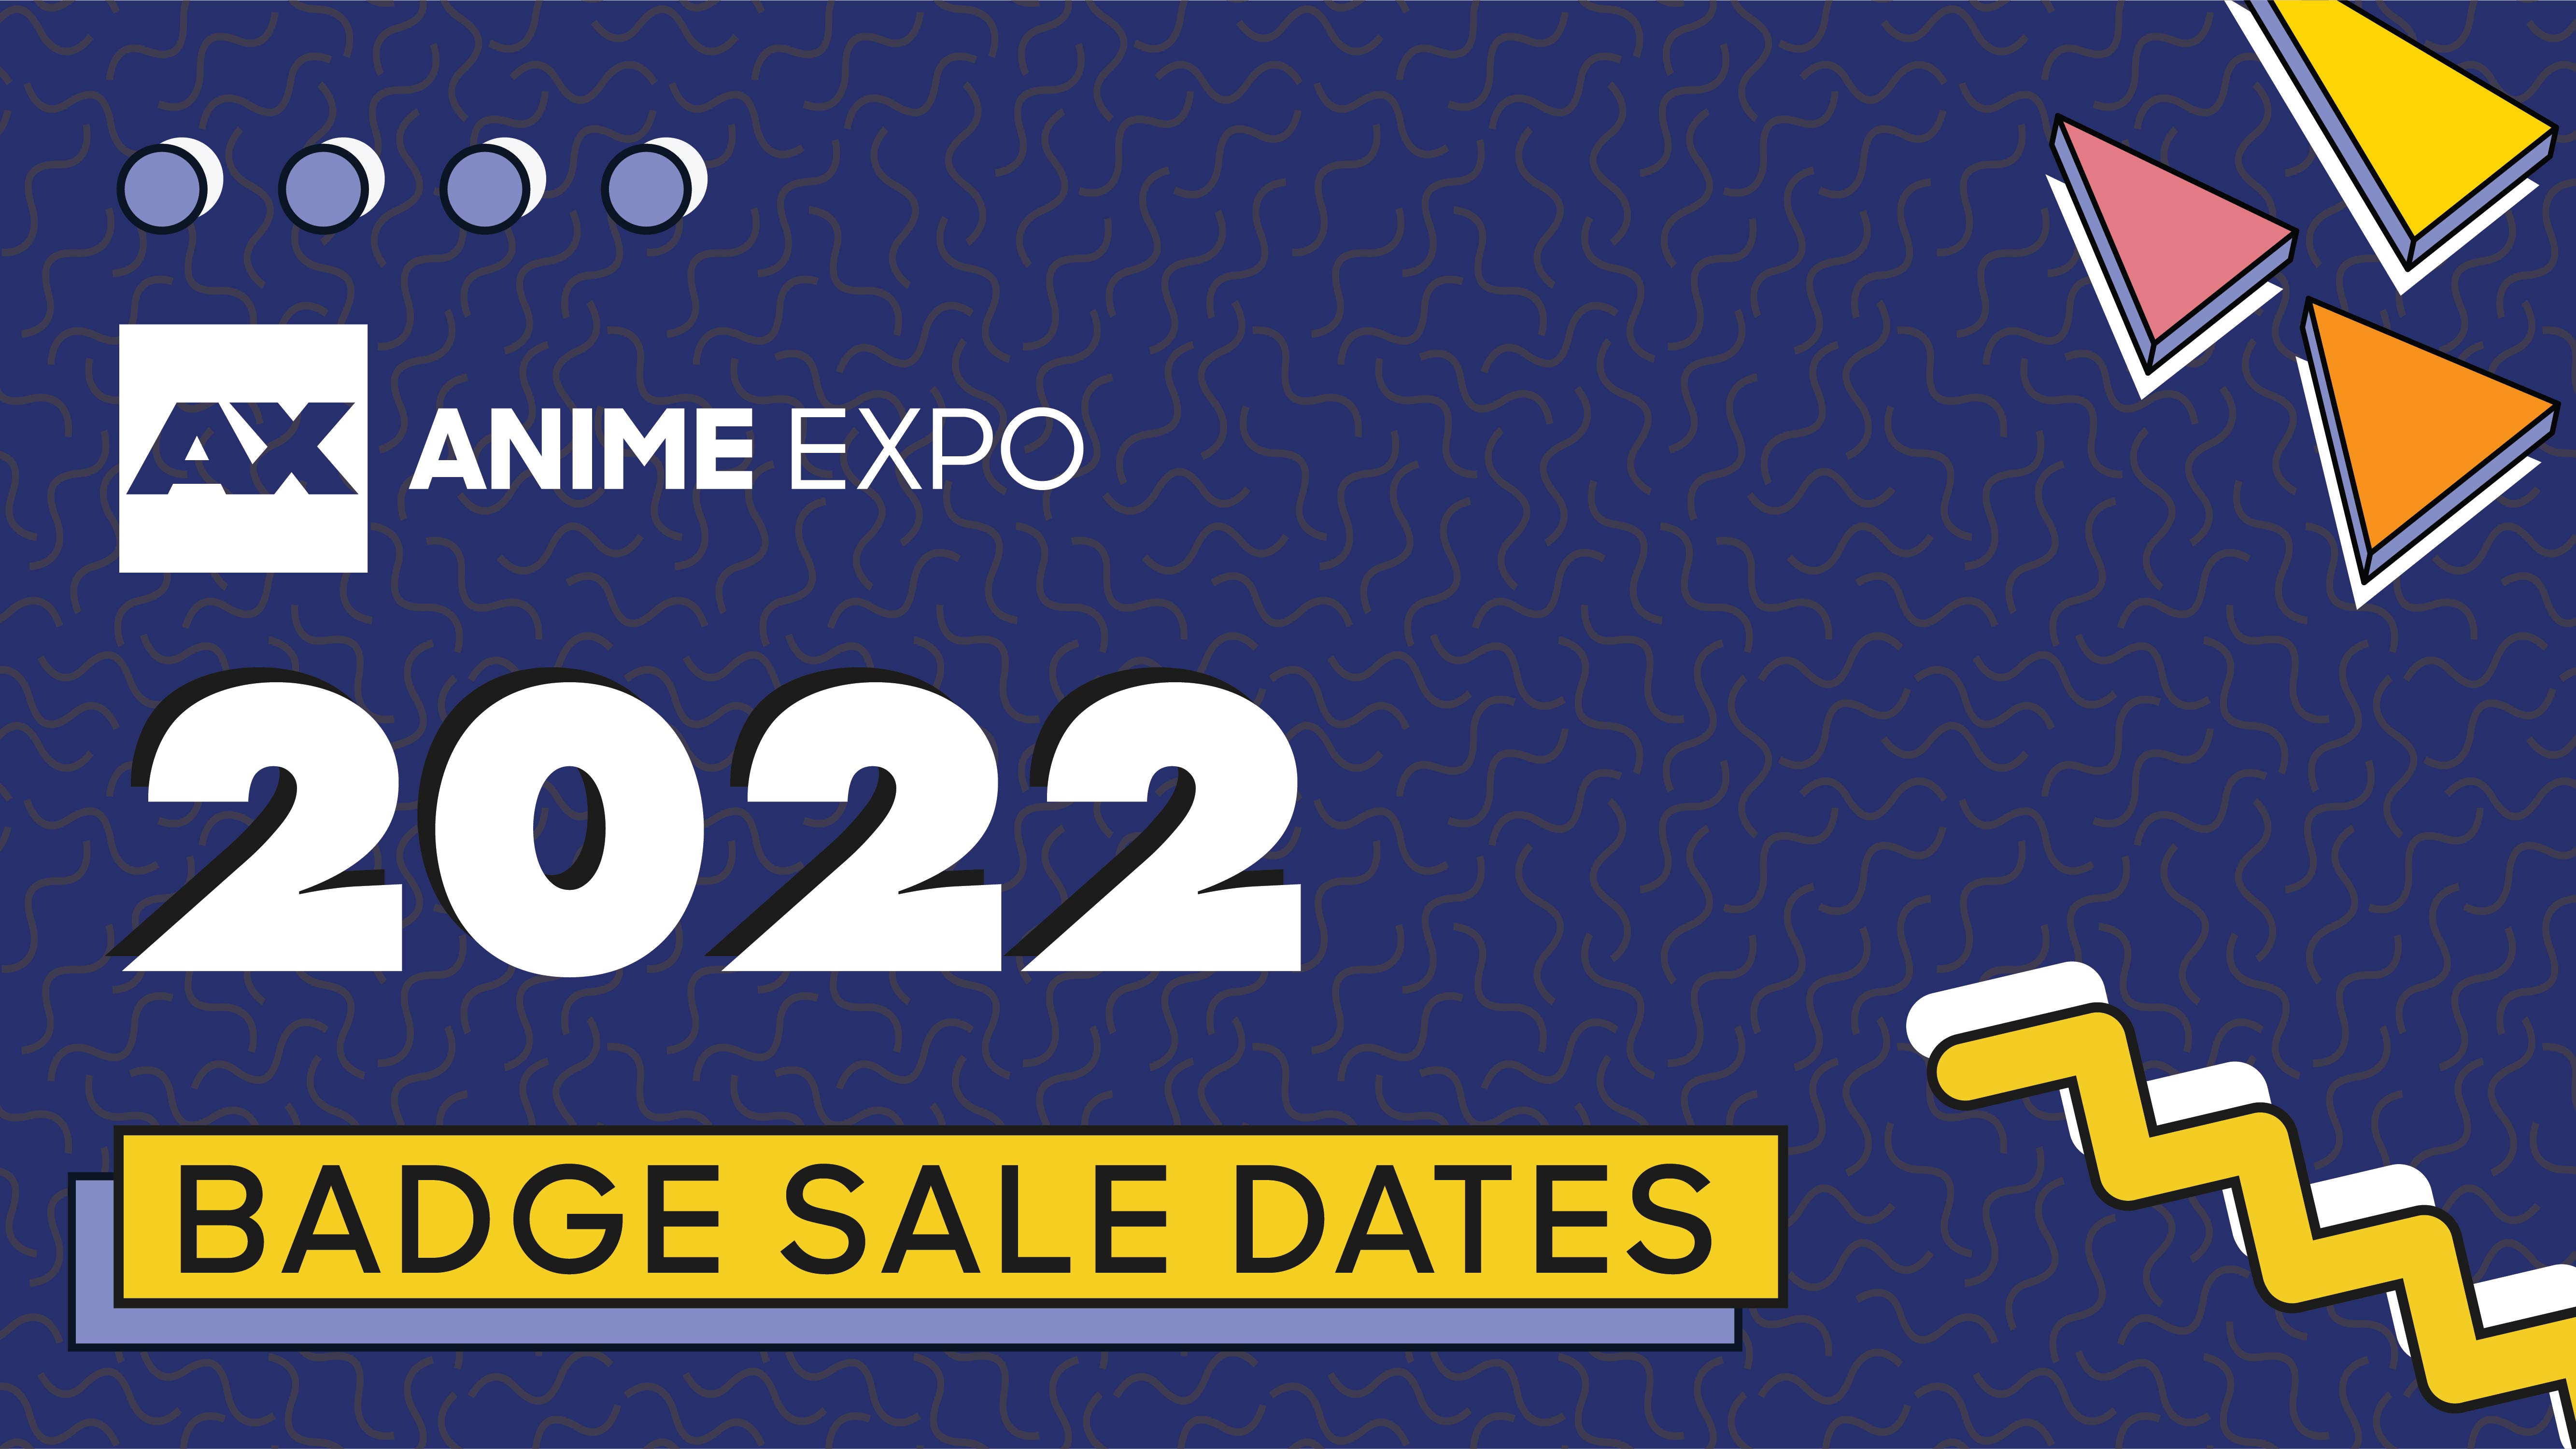 Anime Expo 2022 Registration Opens in January - Anime Expo